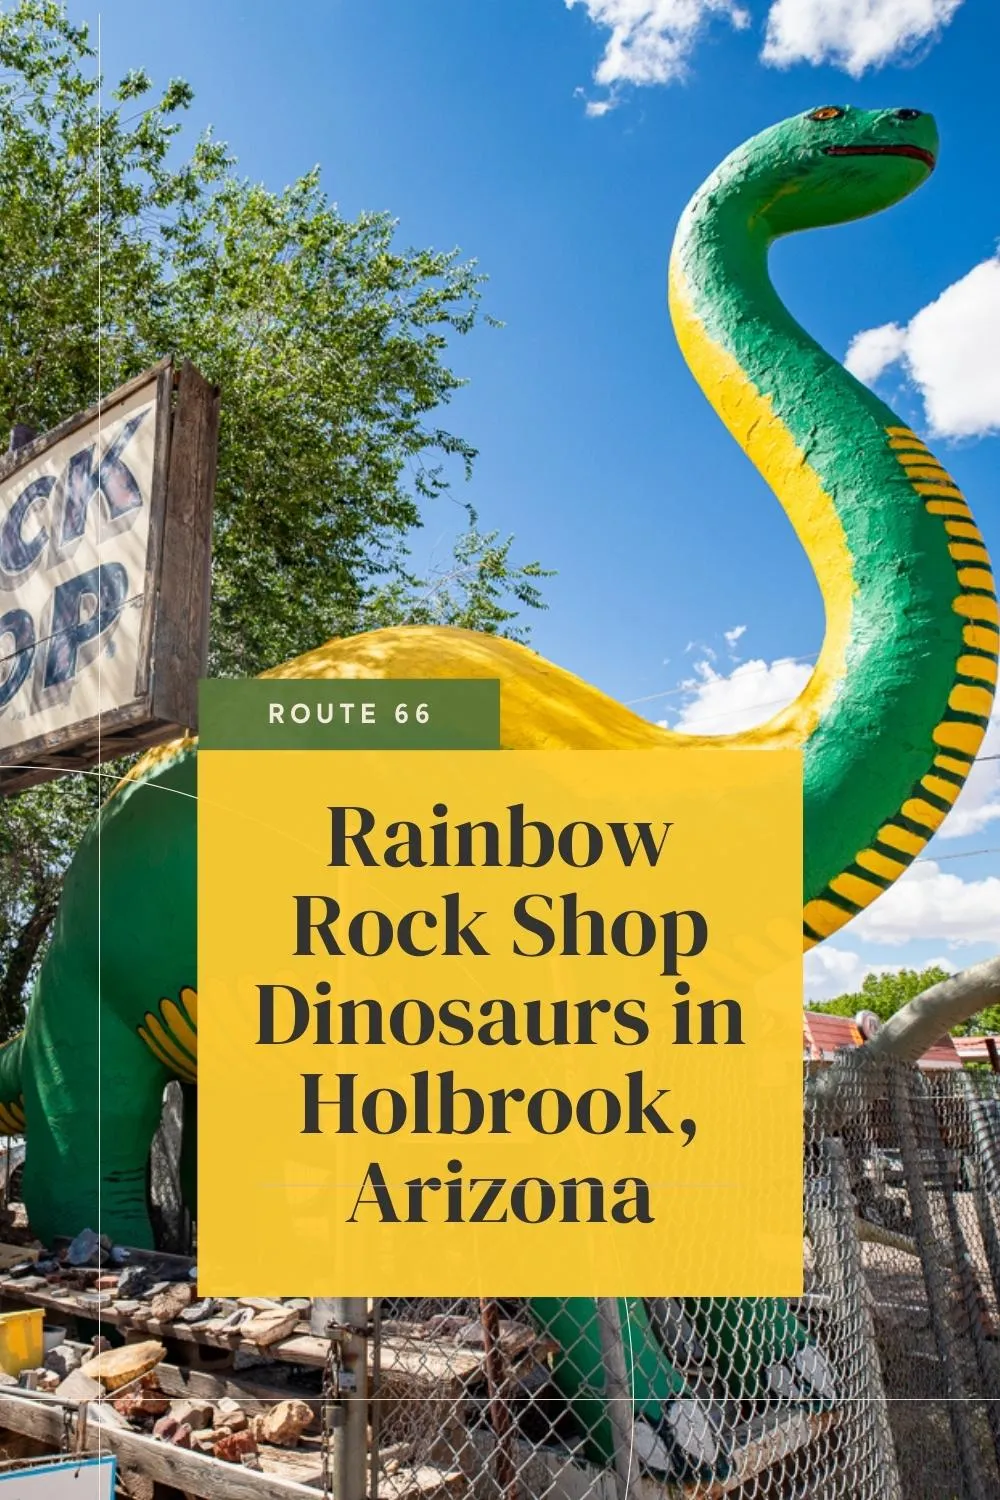 Somewhere over the rainbow on Route 66 you'll find this enchanting roadside attraction: the Rainbow Rock Shop Dinosaurs in Holbrook, Arizona. These cartoon dinosaurs stand outside a petrified wood shop and souvenir stand in Holbrook, Arizona. Visit this fun Arizona Route 66 roadside attraction on your Route 66 road trip. Add it to your travel itinerary and bucket list! #Route66 #Route66RoadTrip #ArizonaRoute66 #RoadsideAttraction #RoadsideAttractions